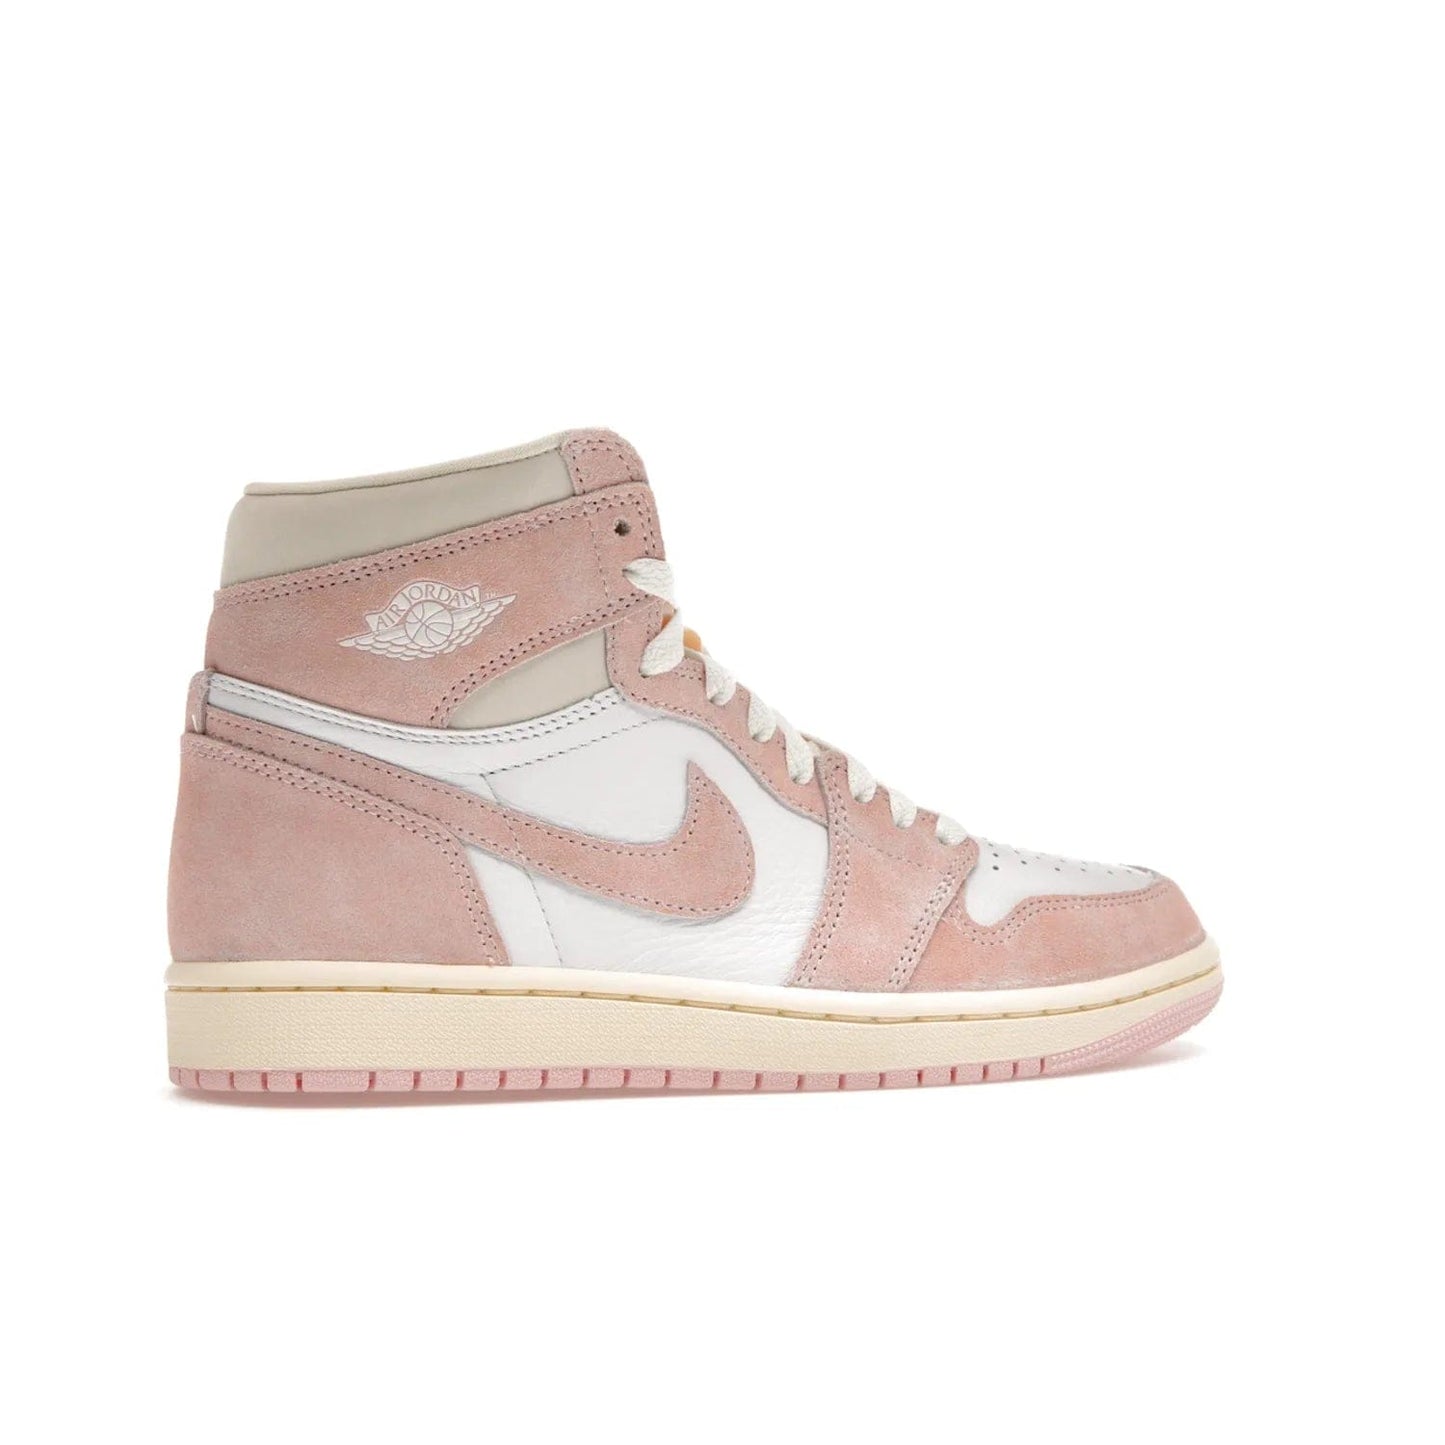 Jordan 1 Retro High OG Washed Pink (Women's) - Image 35 - Only at www.BallersClubKickz.com - Iconic Air Jordan 1 Retro High OG for women with unique pink suede and white leather uppers. Get the timeless look on April 22, 2023.